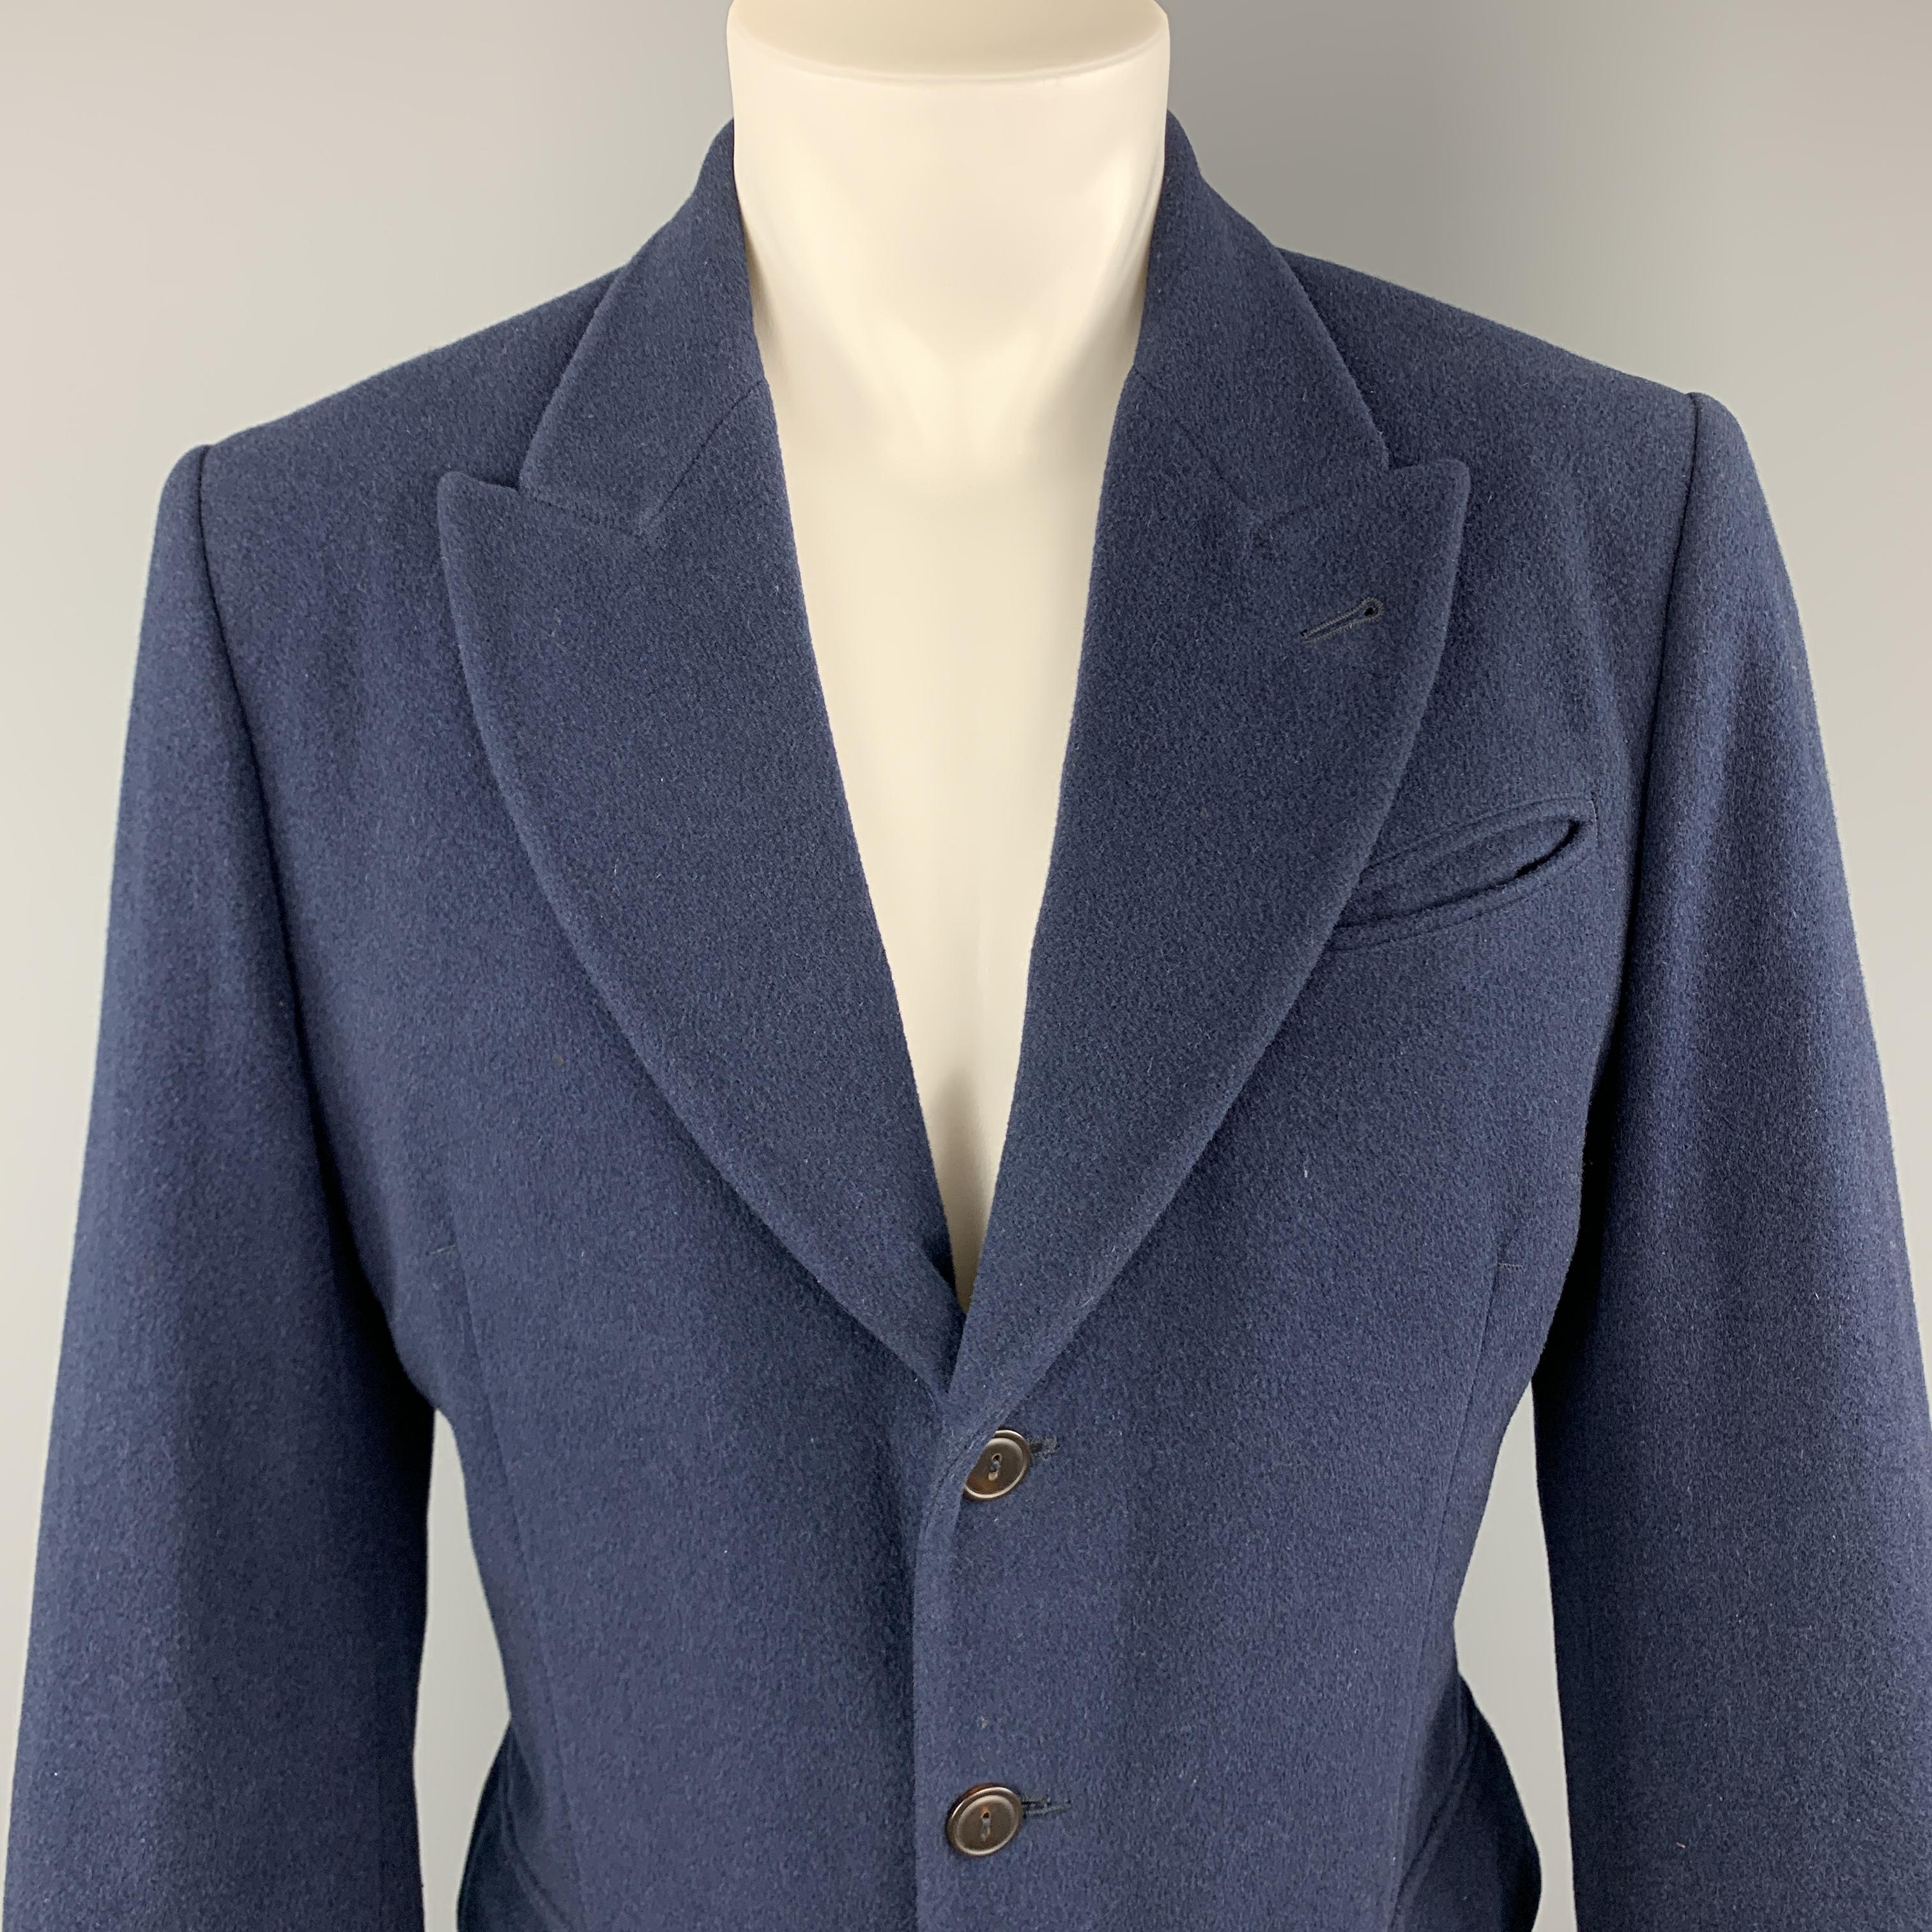 Vintage JEAN PAUL GAULTIER sport coat comes in heavy muted navy blue lana wool with a peak lapel, single breasted three button front, patch flap pockets, functional button cuffs, back belt detail, and striped liner. Made in Italy. 

Good Pre-Owned